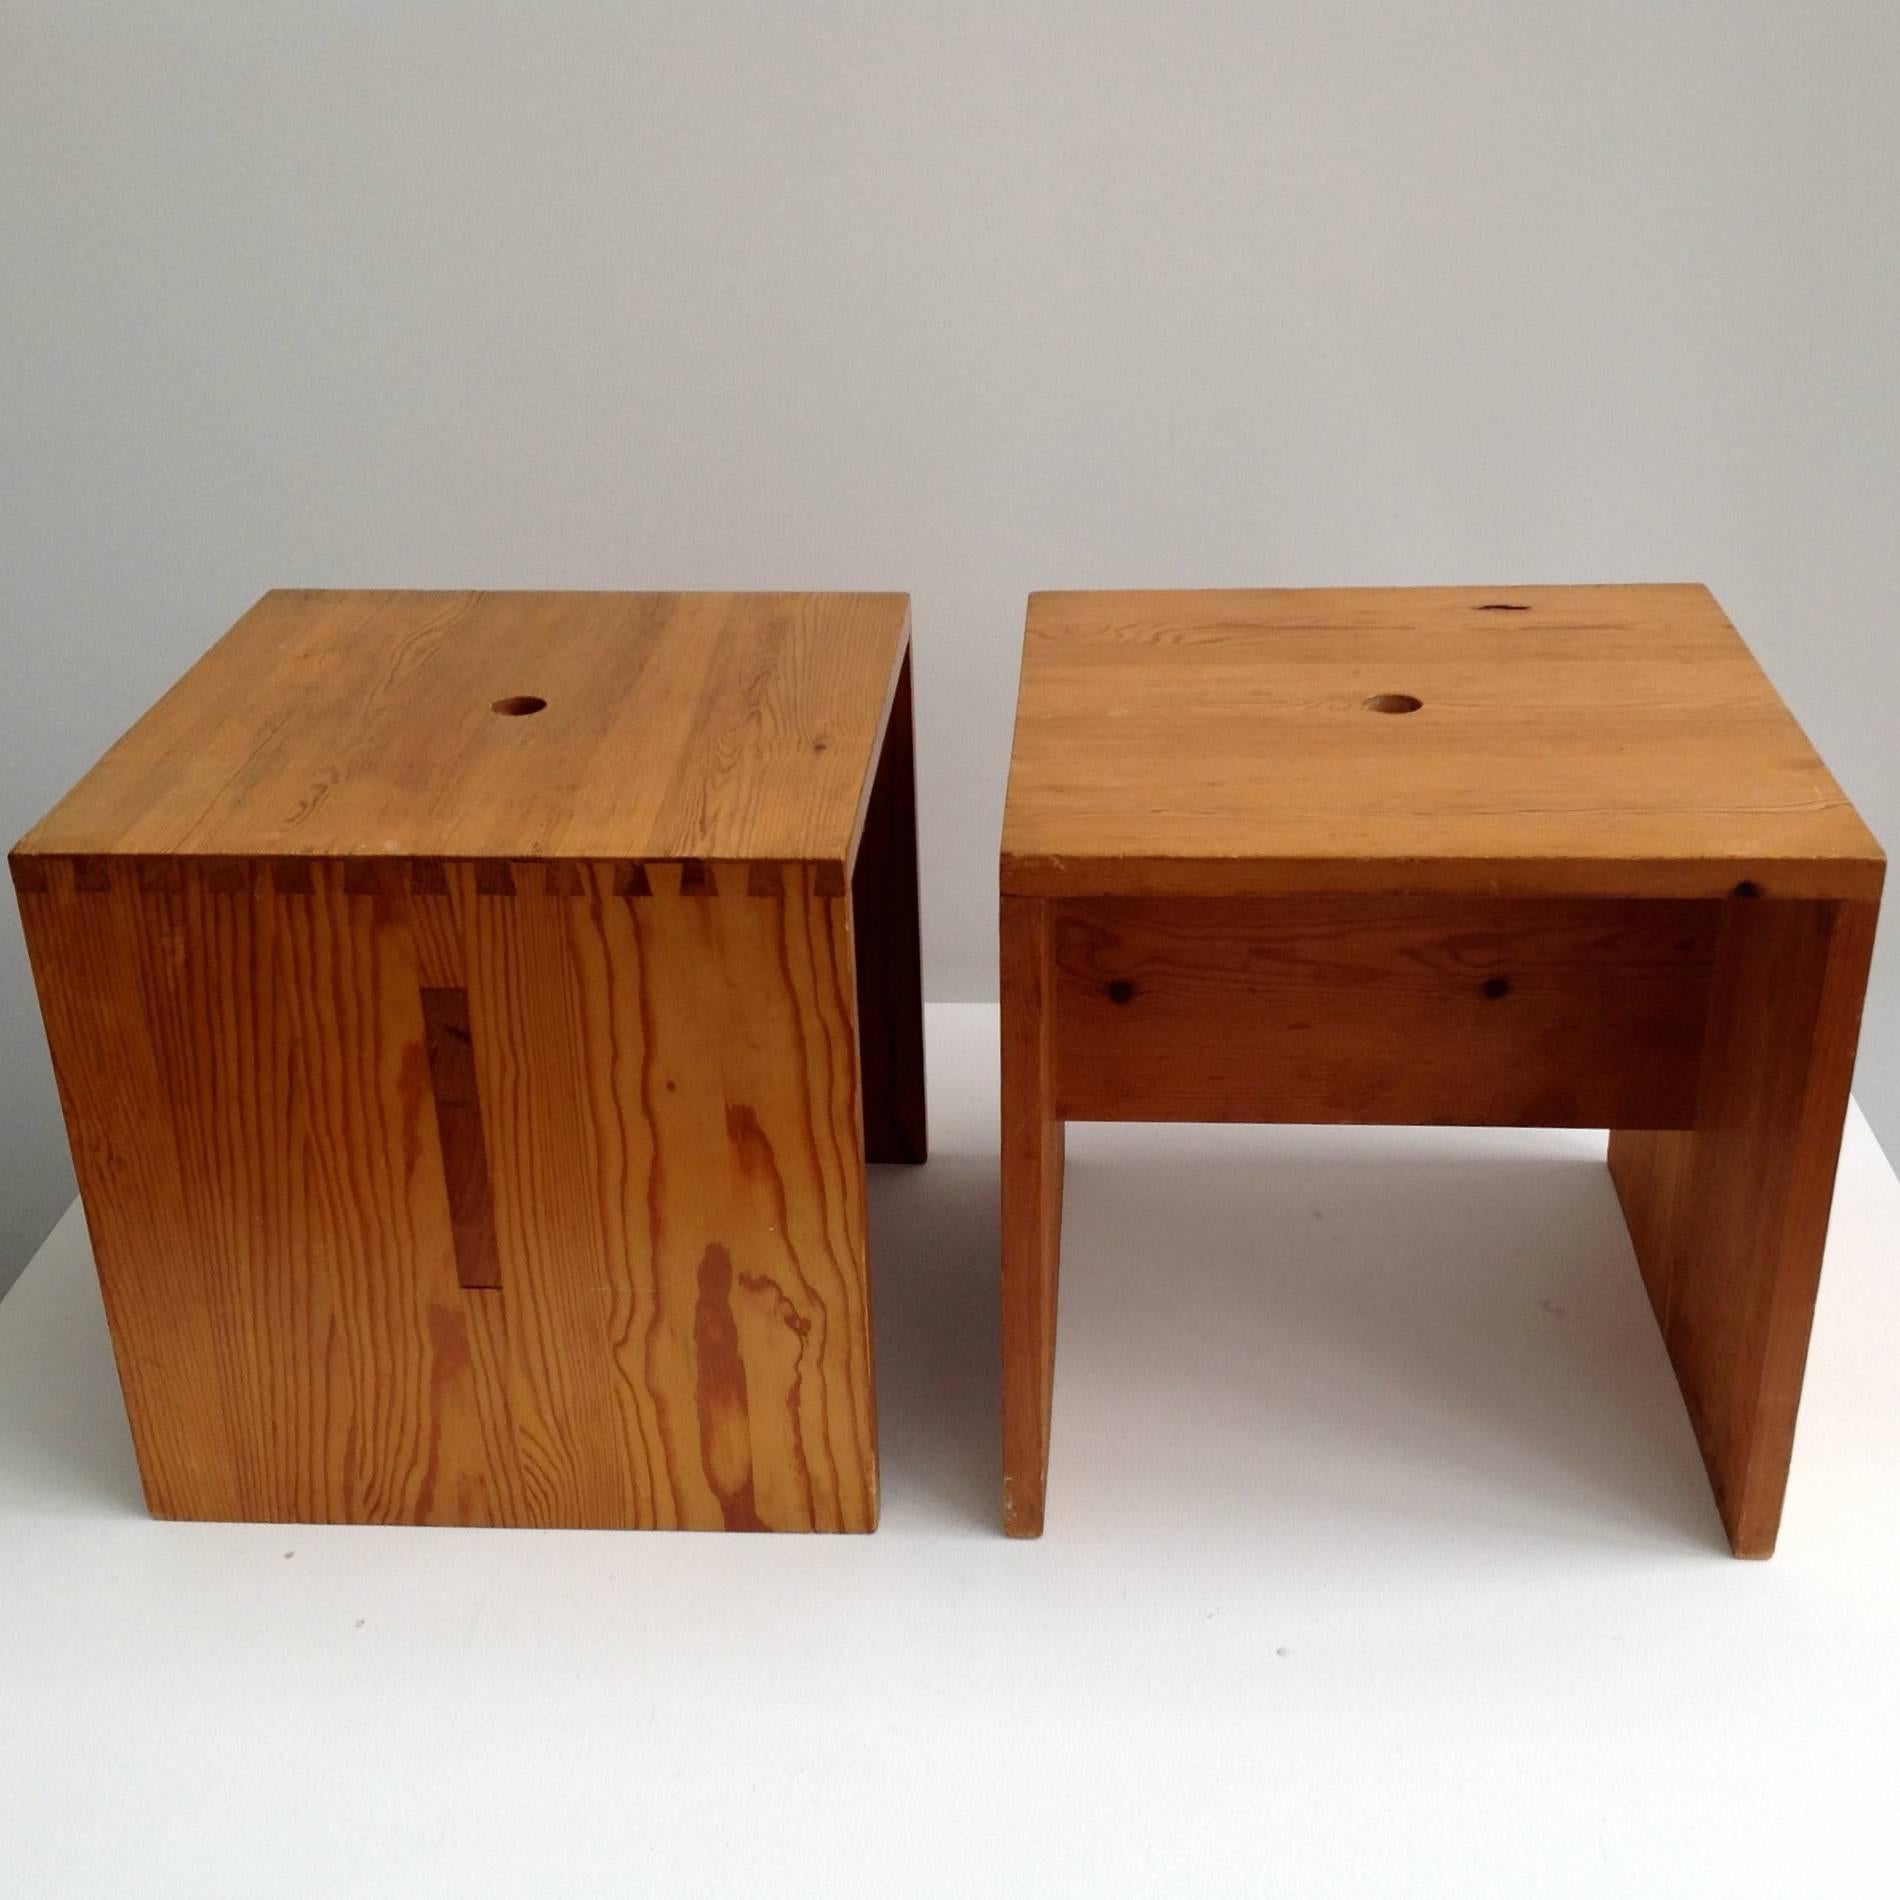 Pair of custom-made side tables, style Pierre Chapo or Charlotte Perriand.

More pictures and with a higher resolution are available on request. With over 25 year's experience, we are one of the first traders in Europe with objects from the 20th